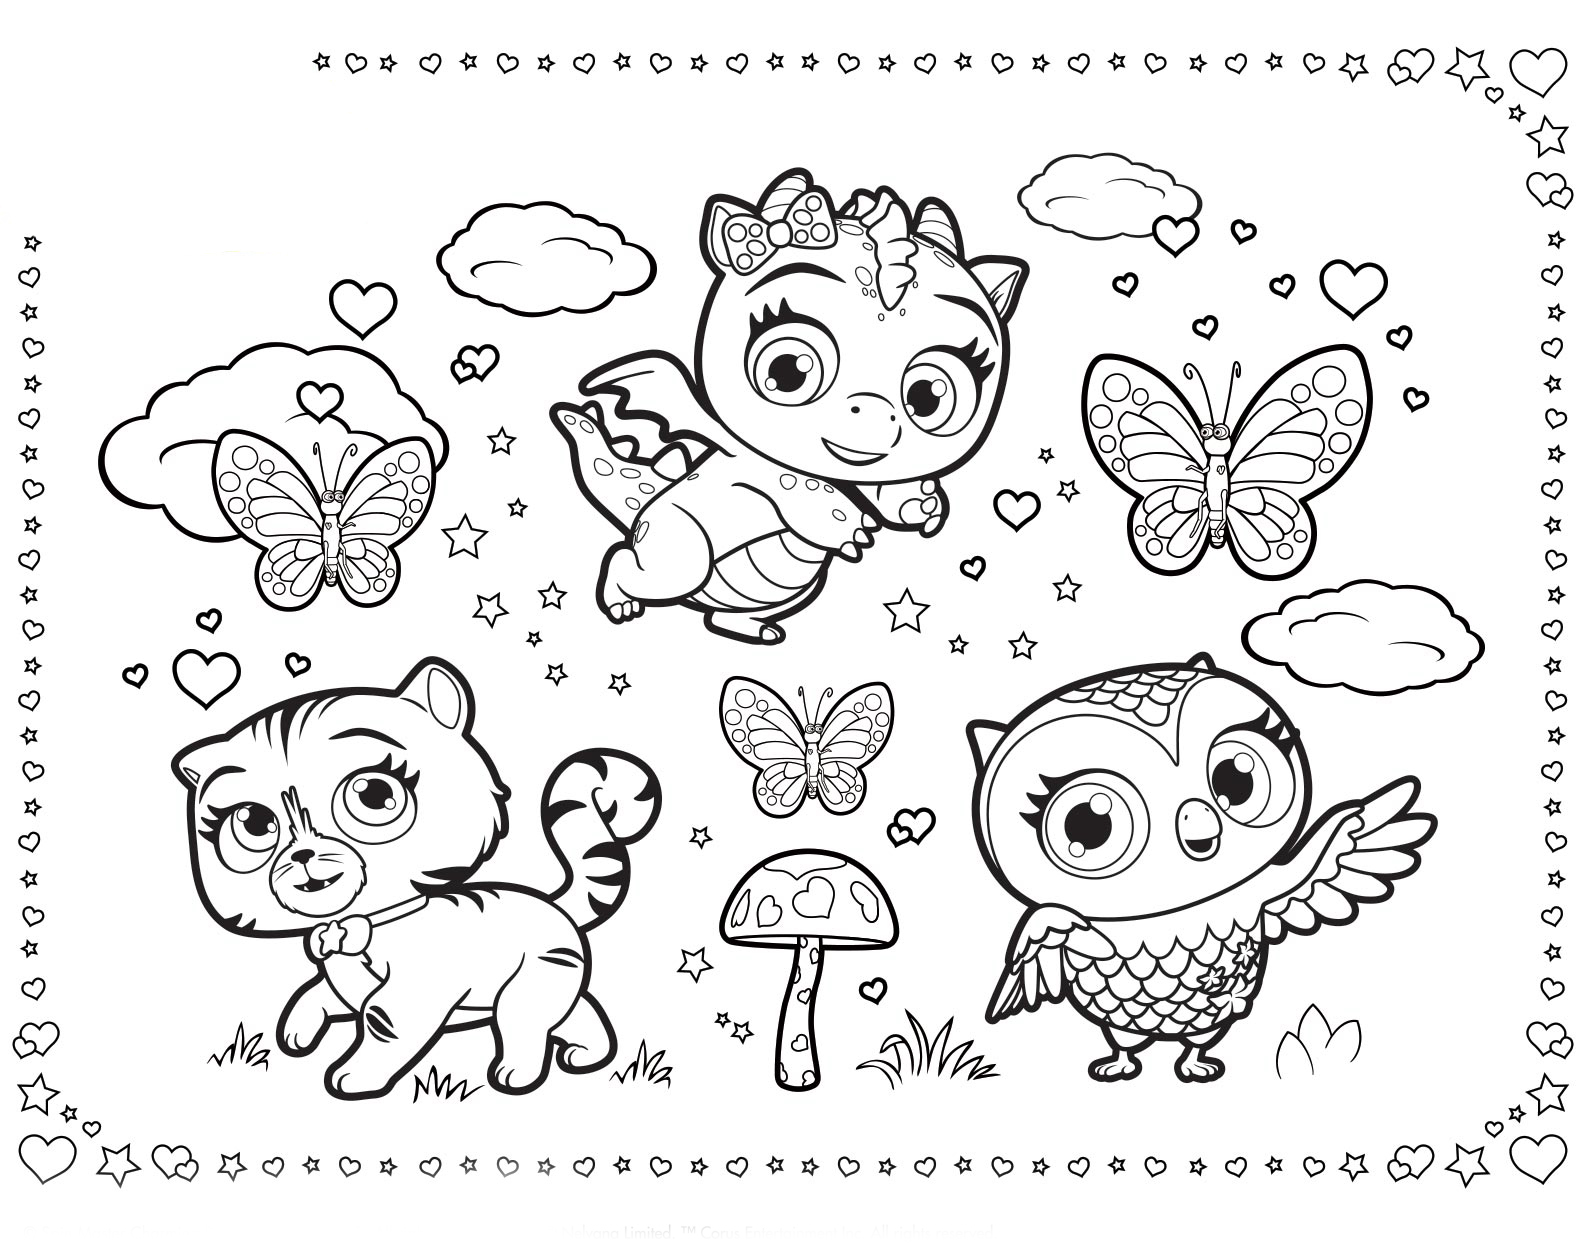 Drawing little charmers